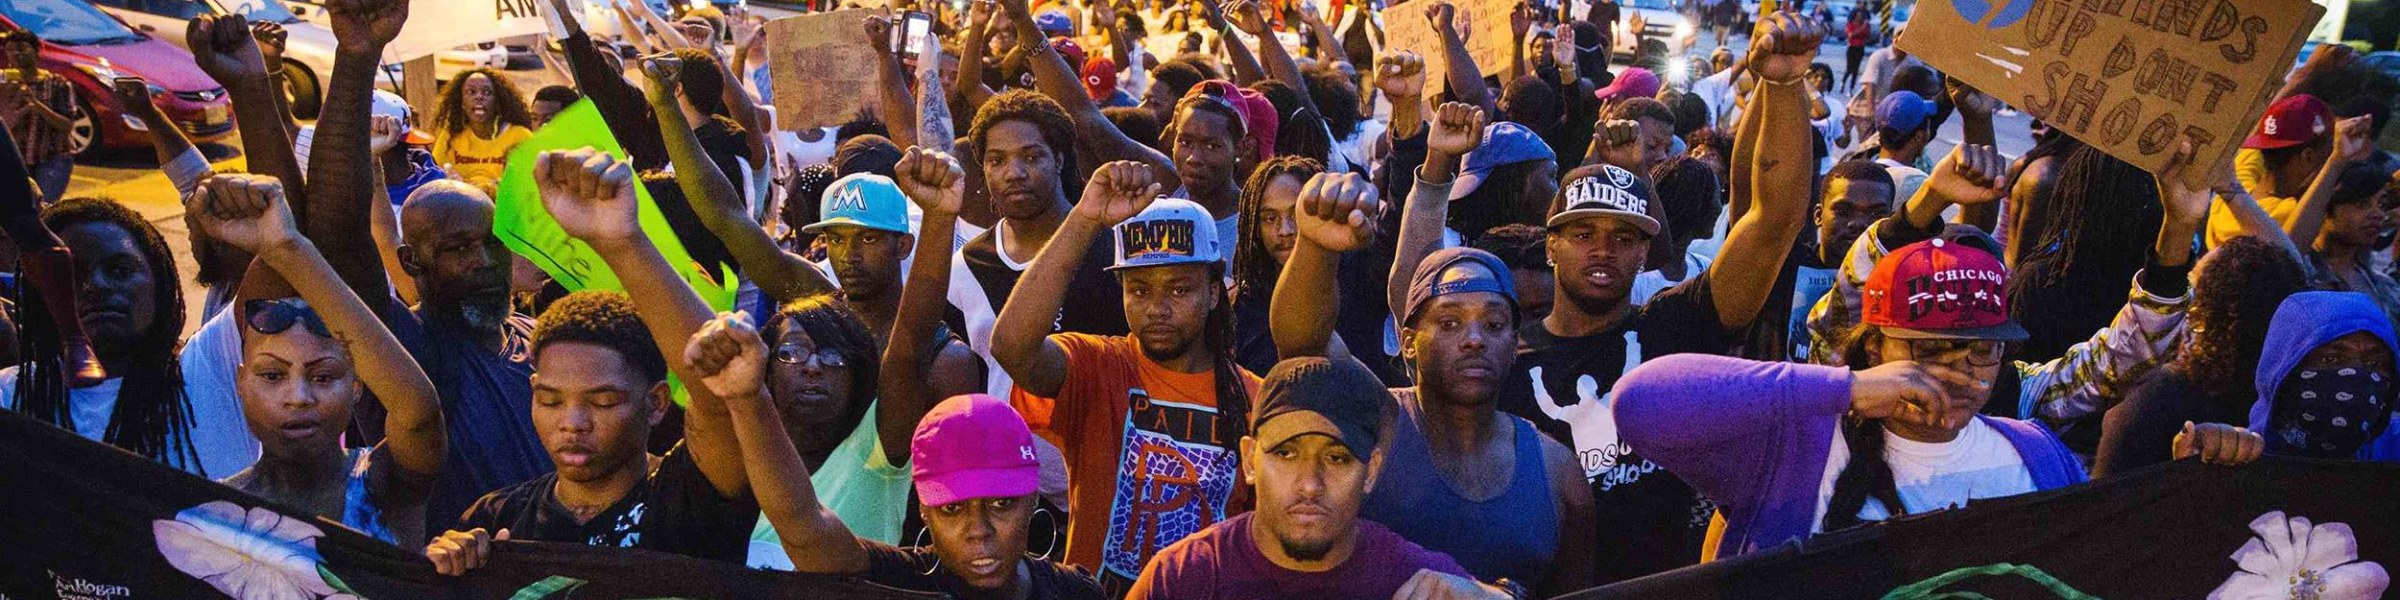 Image: Protestors march and hold their fists aloft as they march during ongoing demonstrations in reaction to the shooting of Michael Brown in Ferguson, Missouri